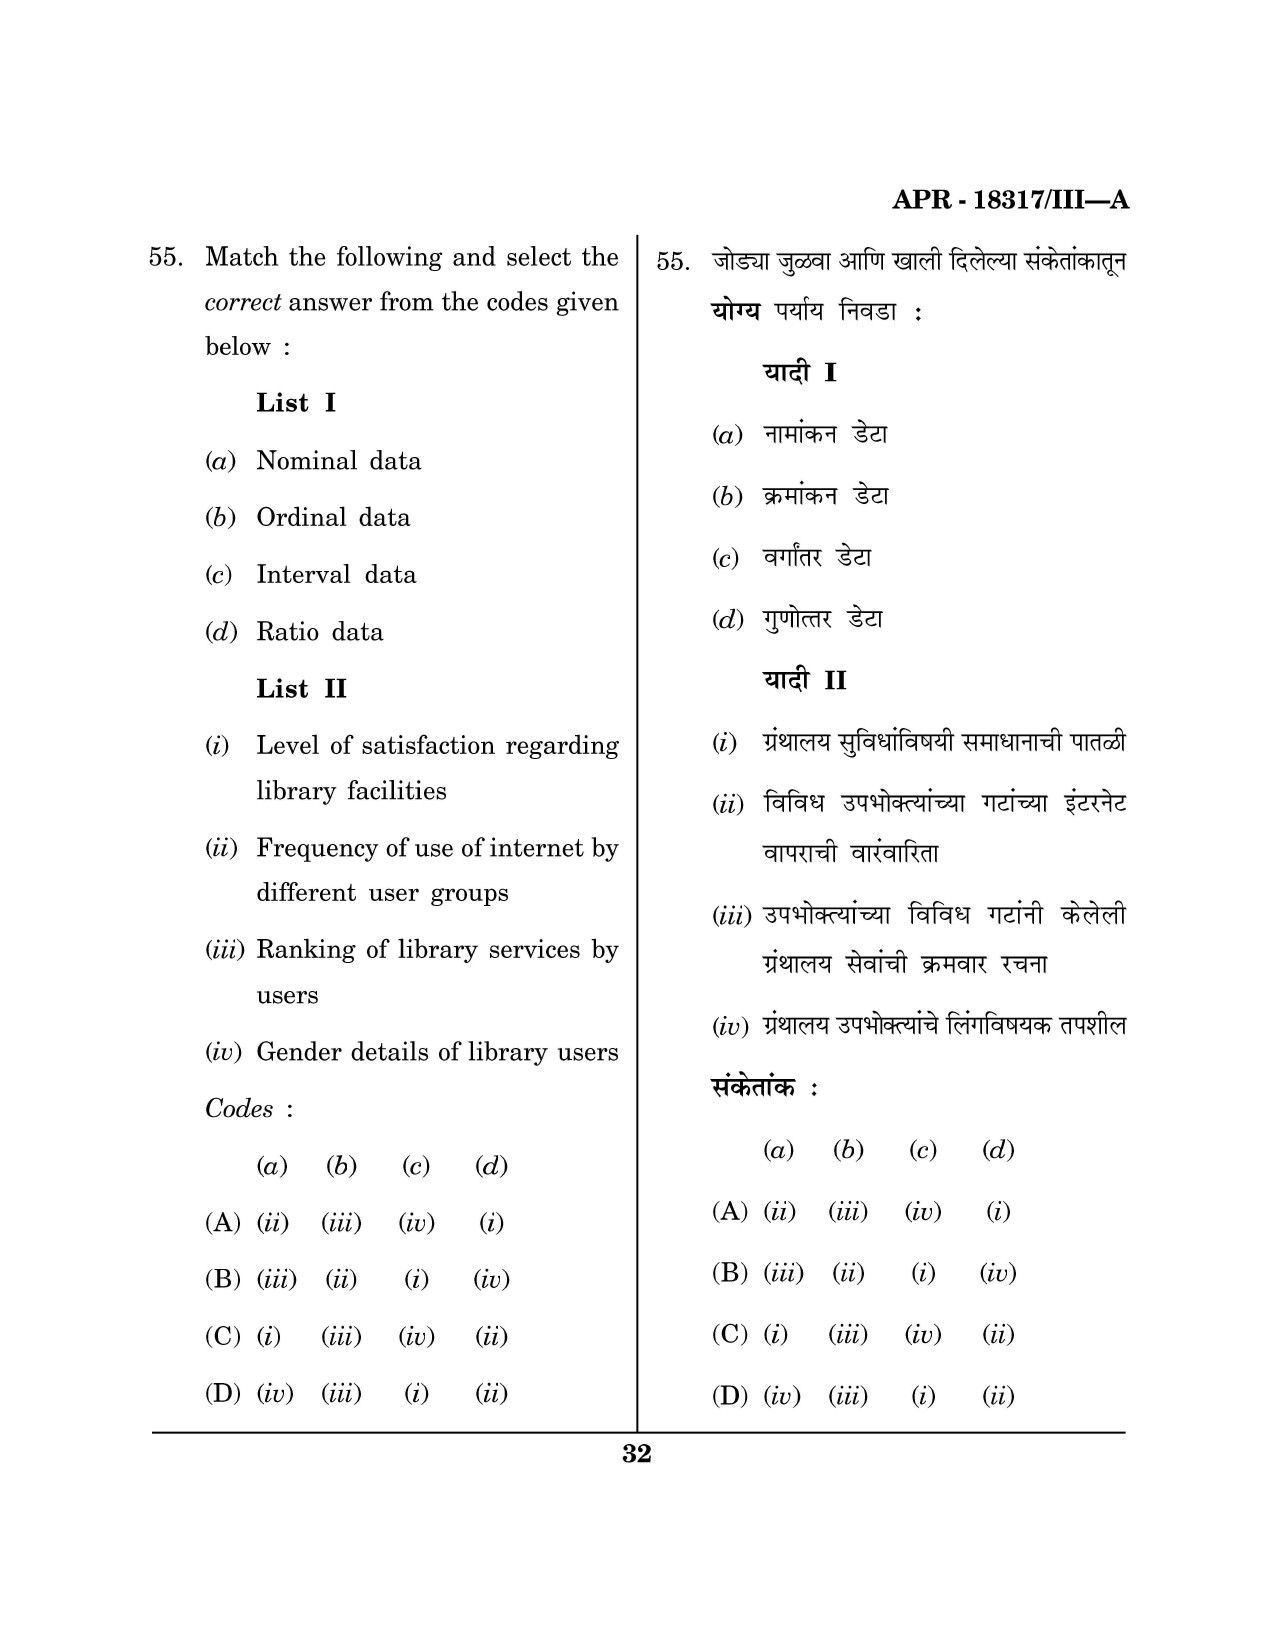 Maharashtra SET Library Information Science Question Paper III April 2017 31